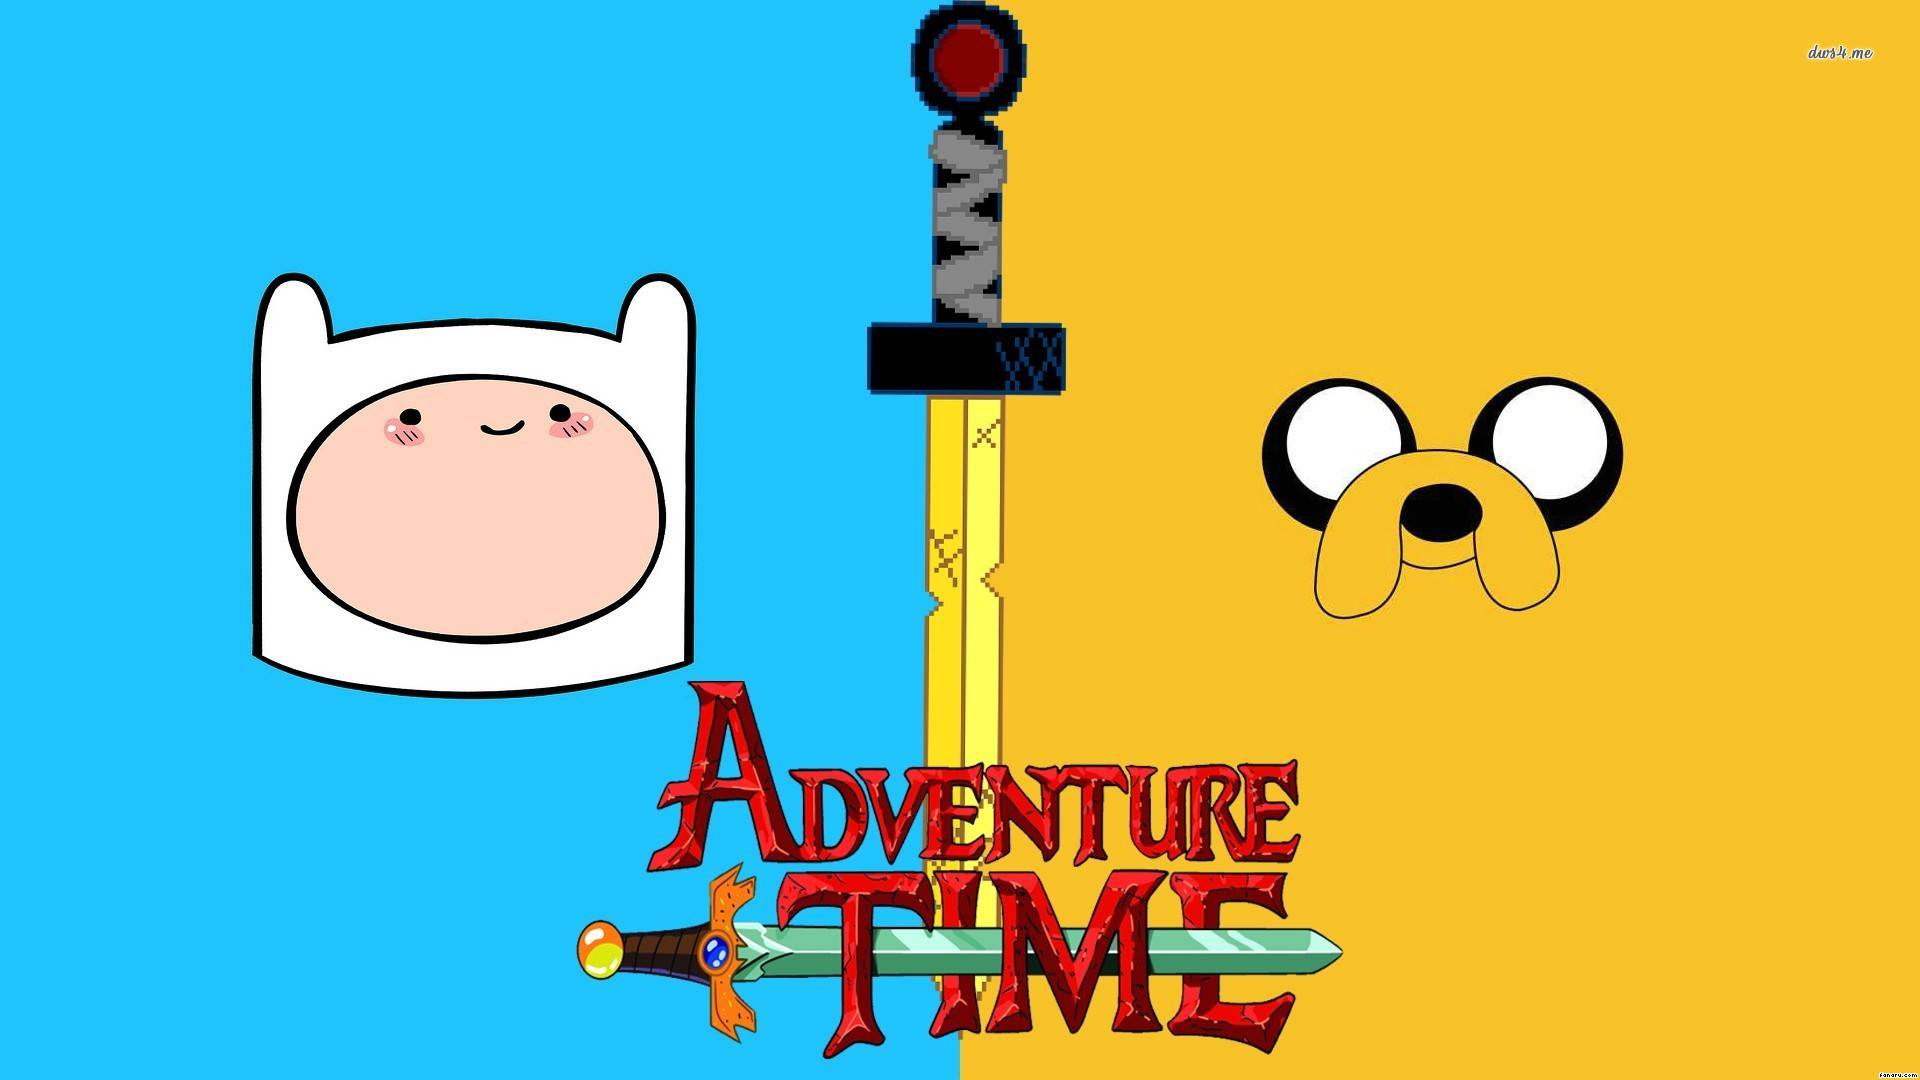 Finn And Jake Wallpapers - Wallpaper Cave